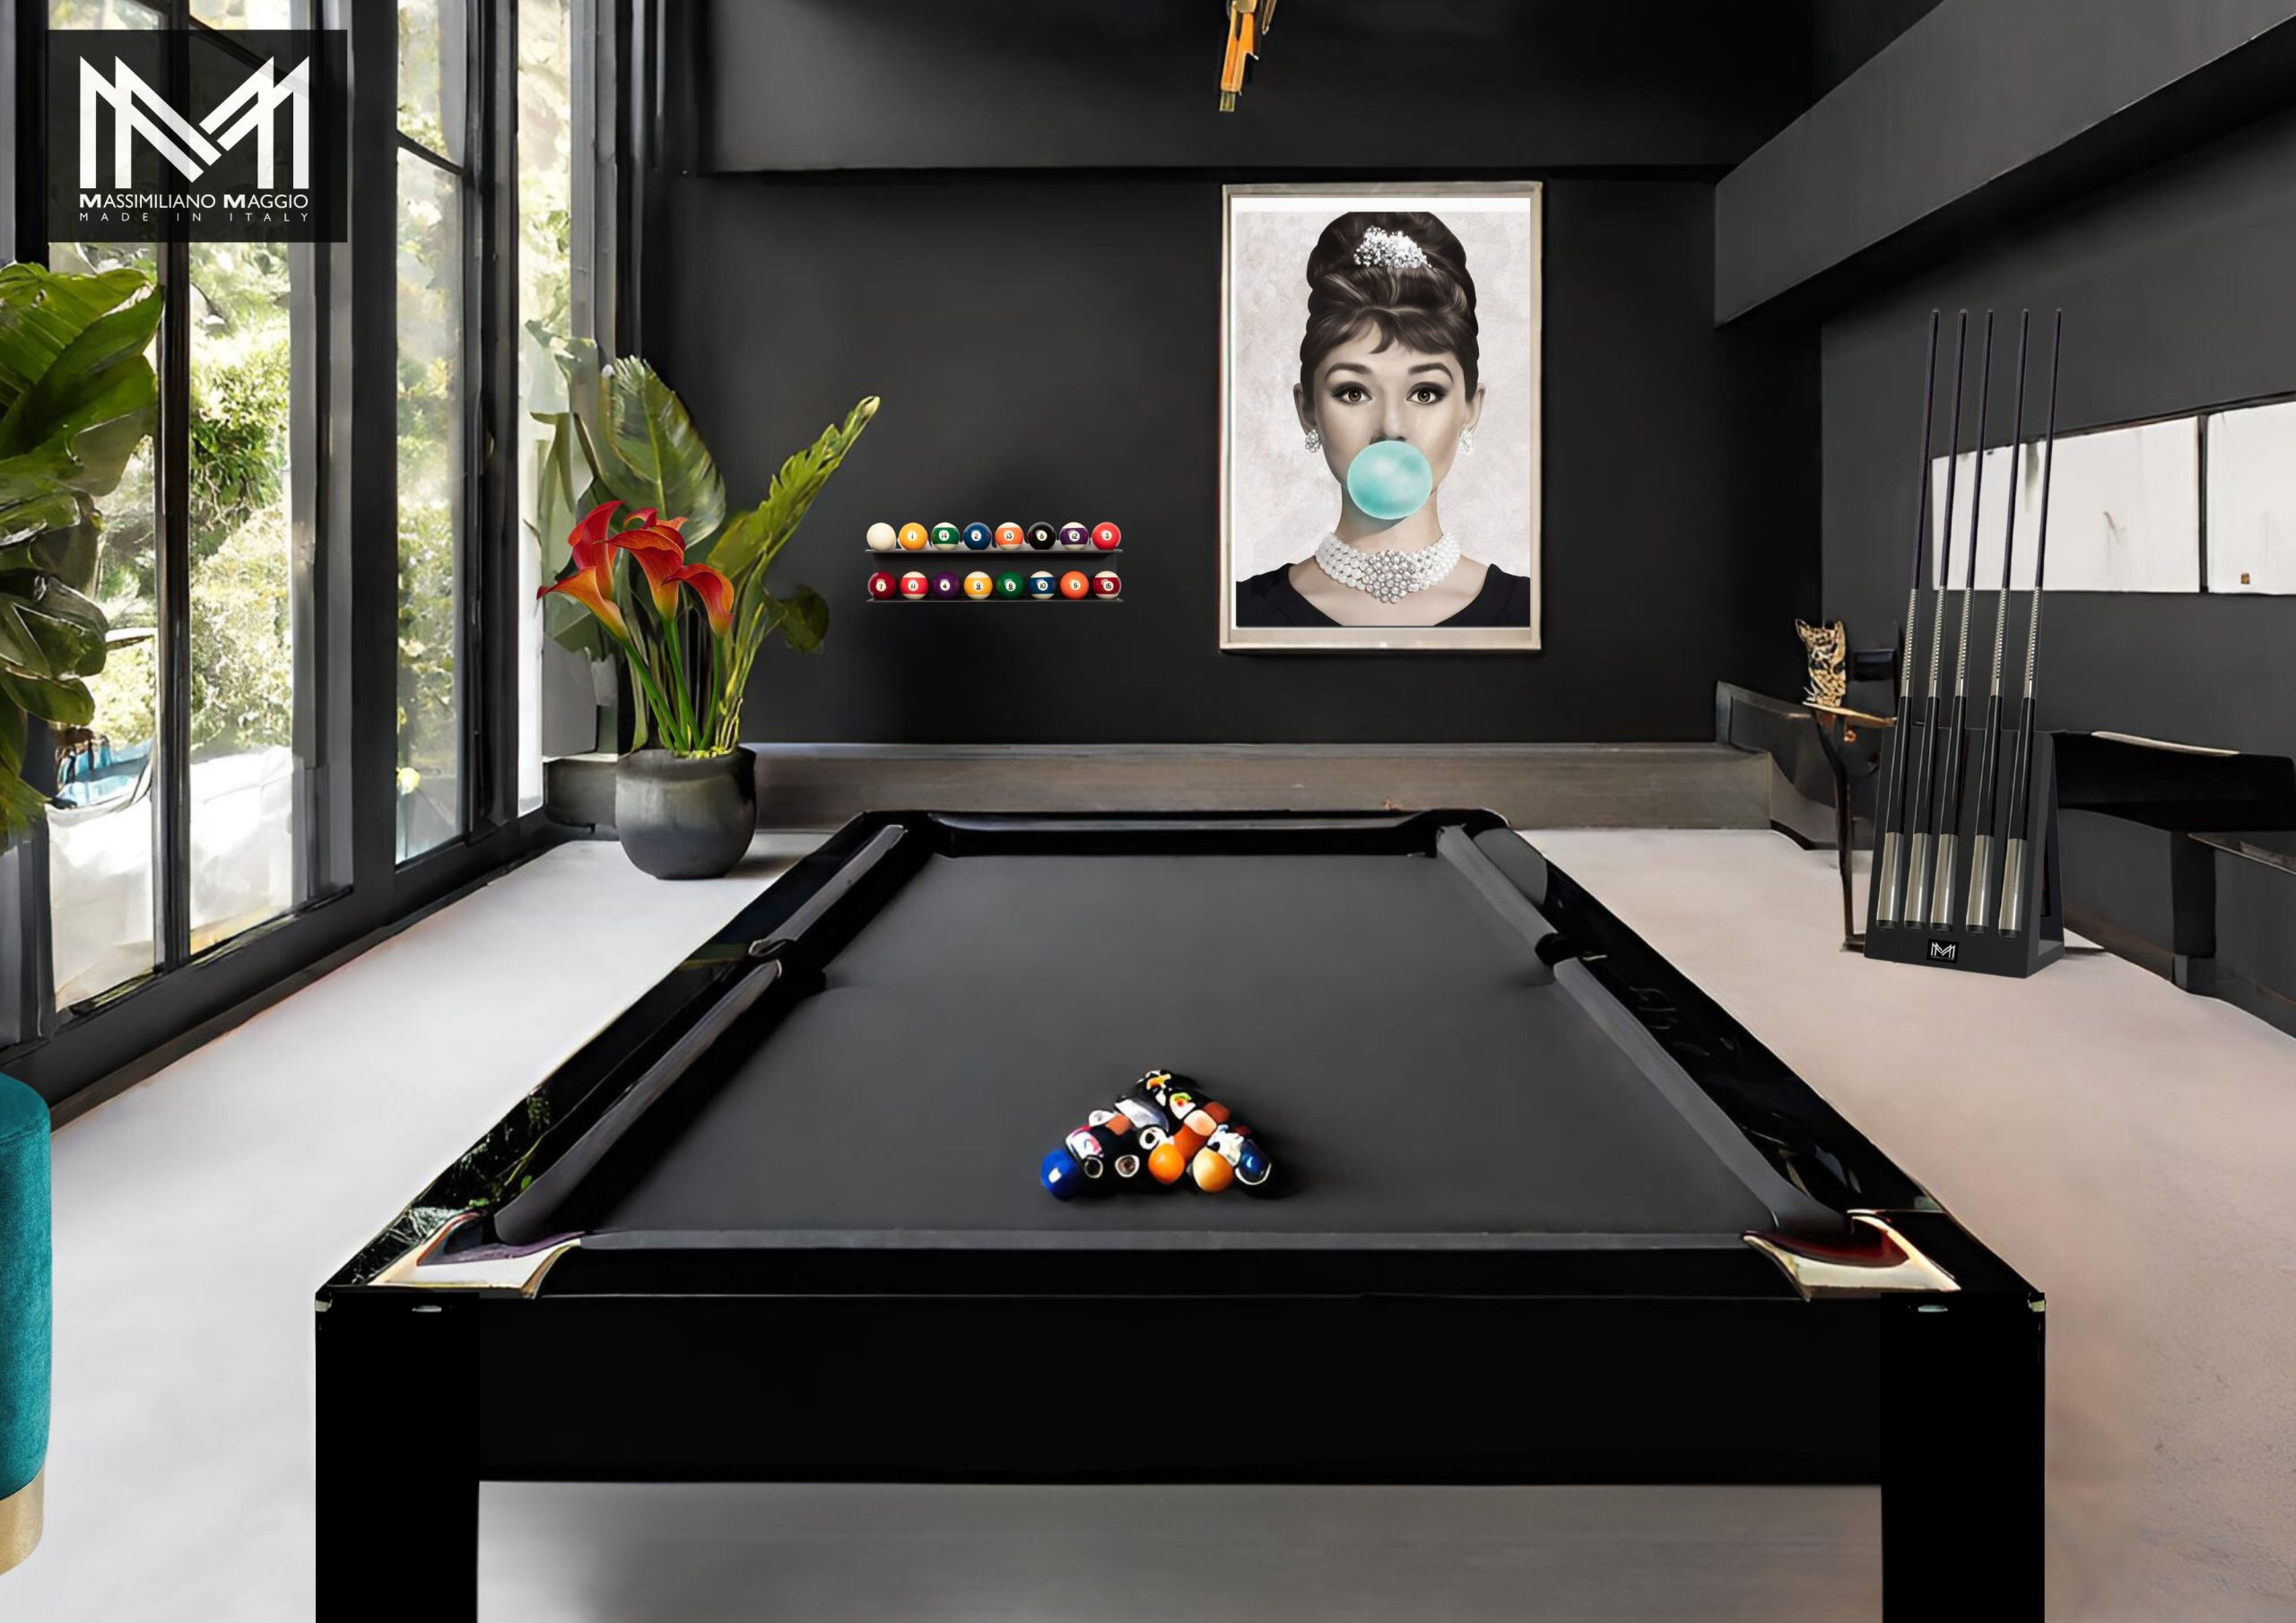 Luxury Pool Table Acrylic Modern Massimiliano Maggio Made in Italy